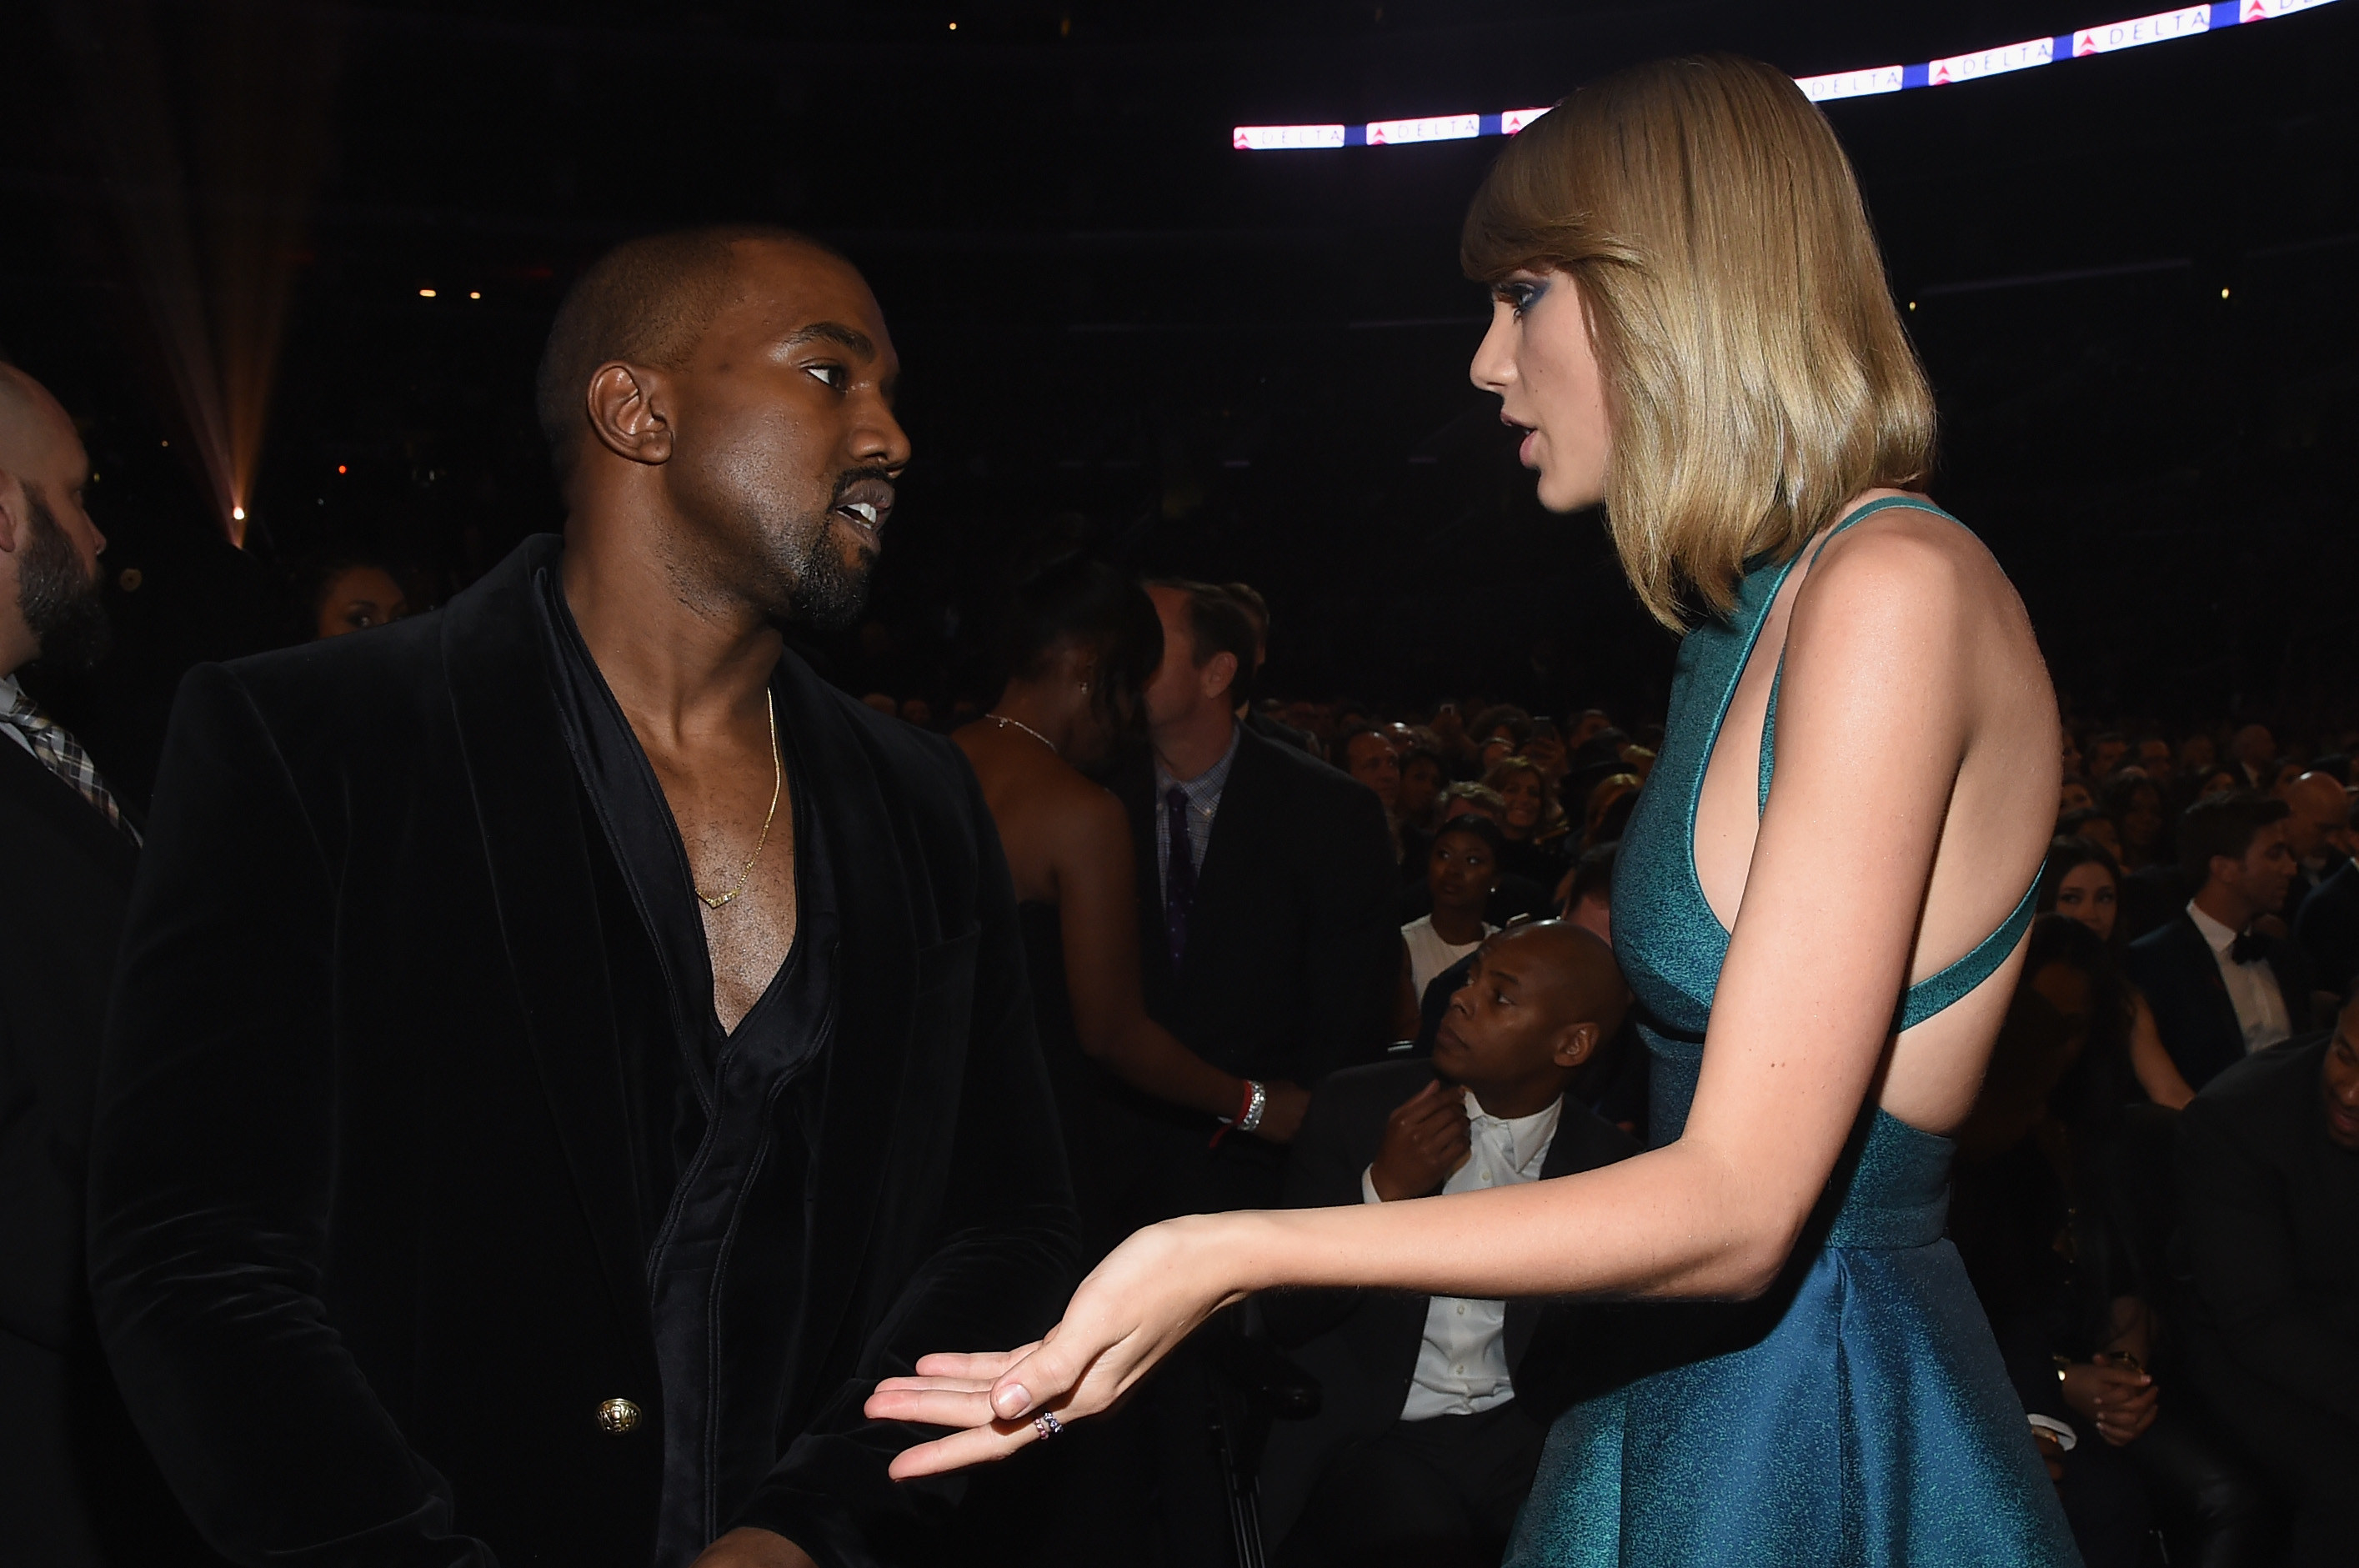 Kanye and Taylor speak to each other